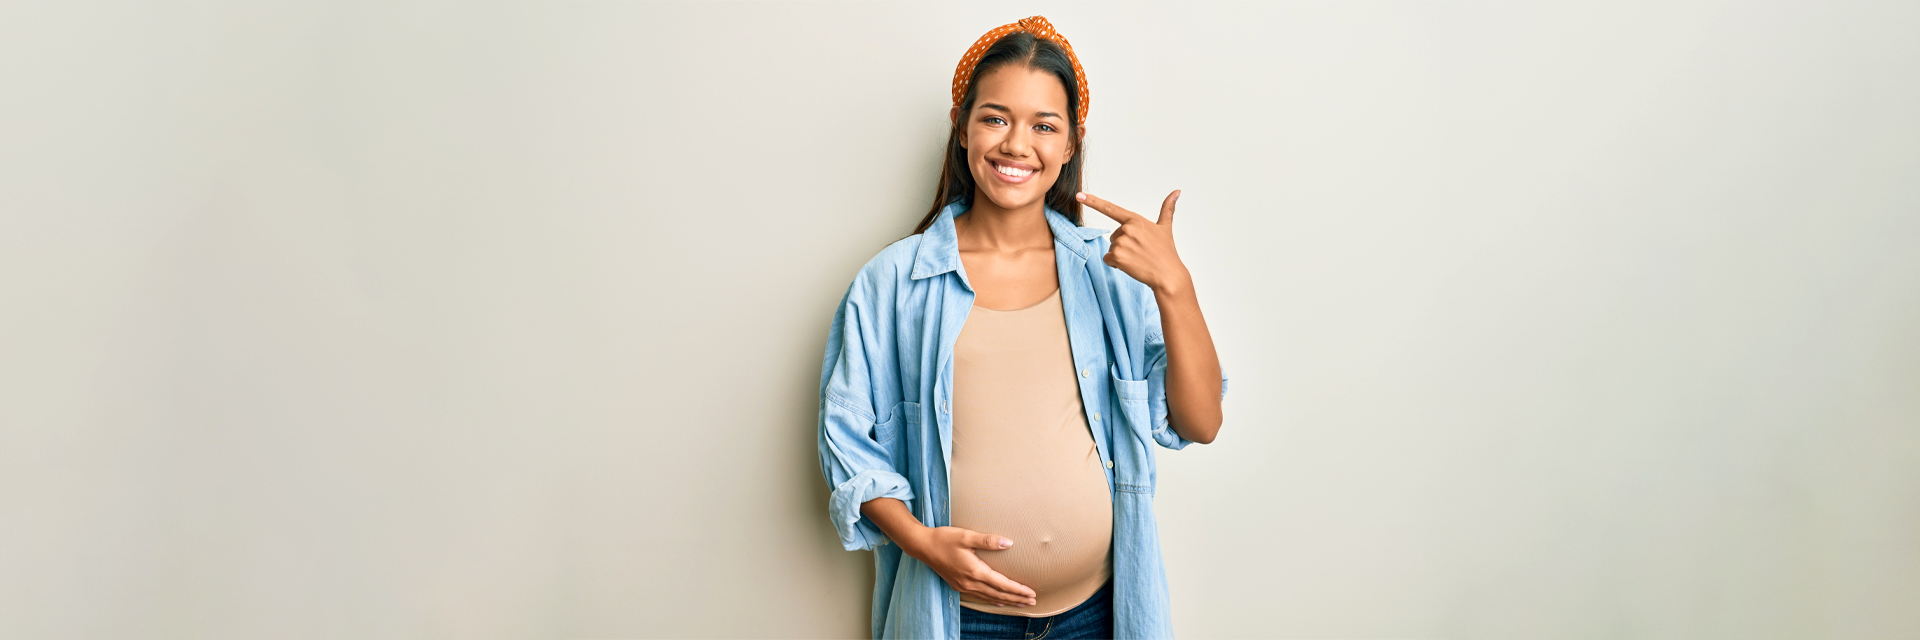 Dealing With Morning Sickness In Pregnancy (A Tooth-Friendly Perspective)